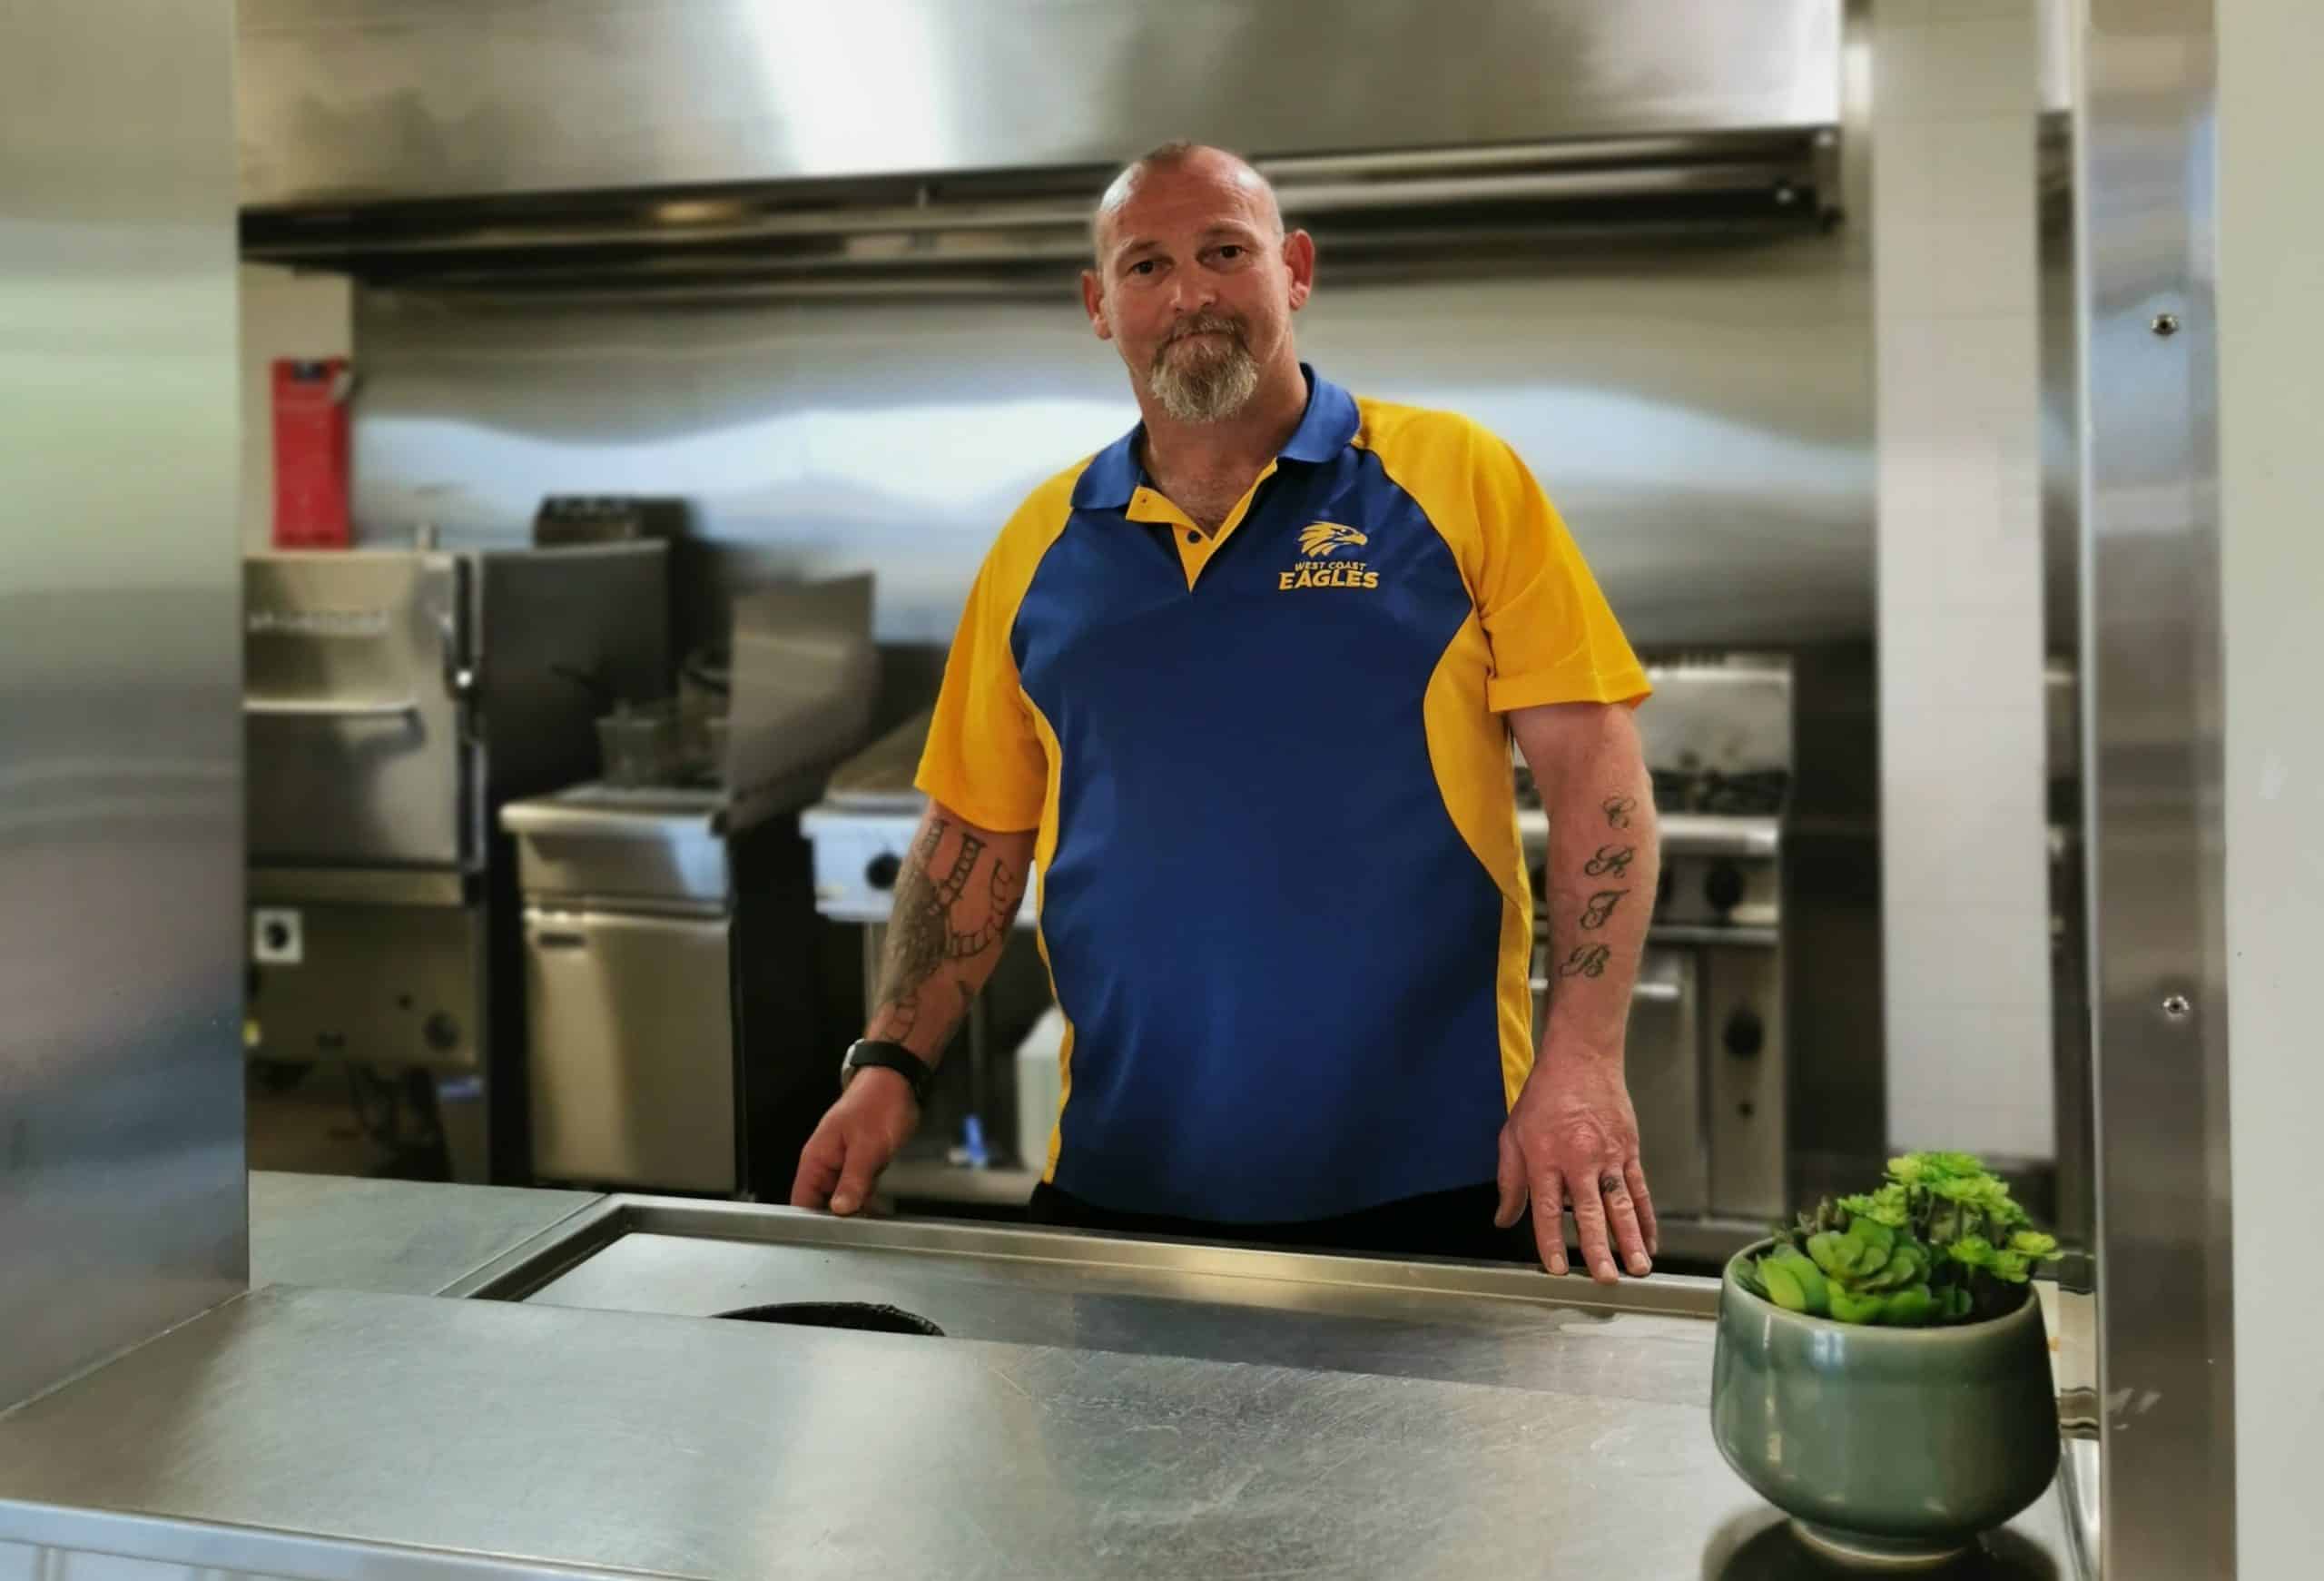 A path to recovery: A man in a blue and yellow polo shirt featuring the West Coast Eagles team emblem stands in an industrial kitchen.